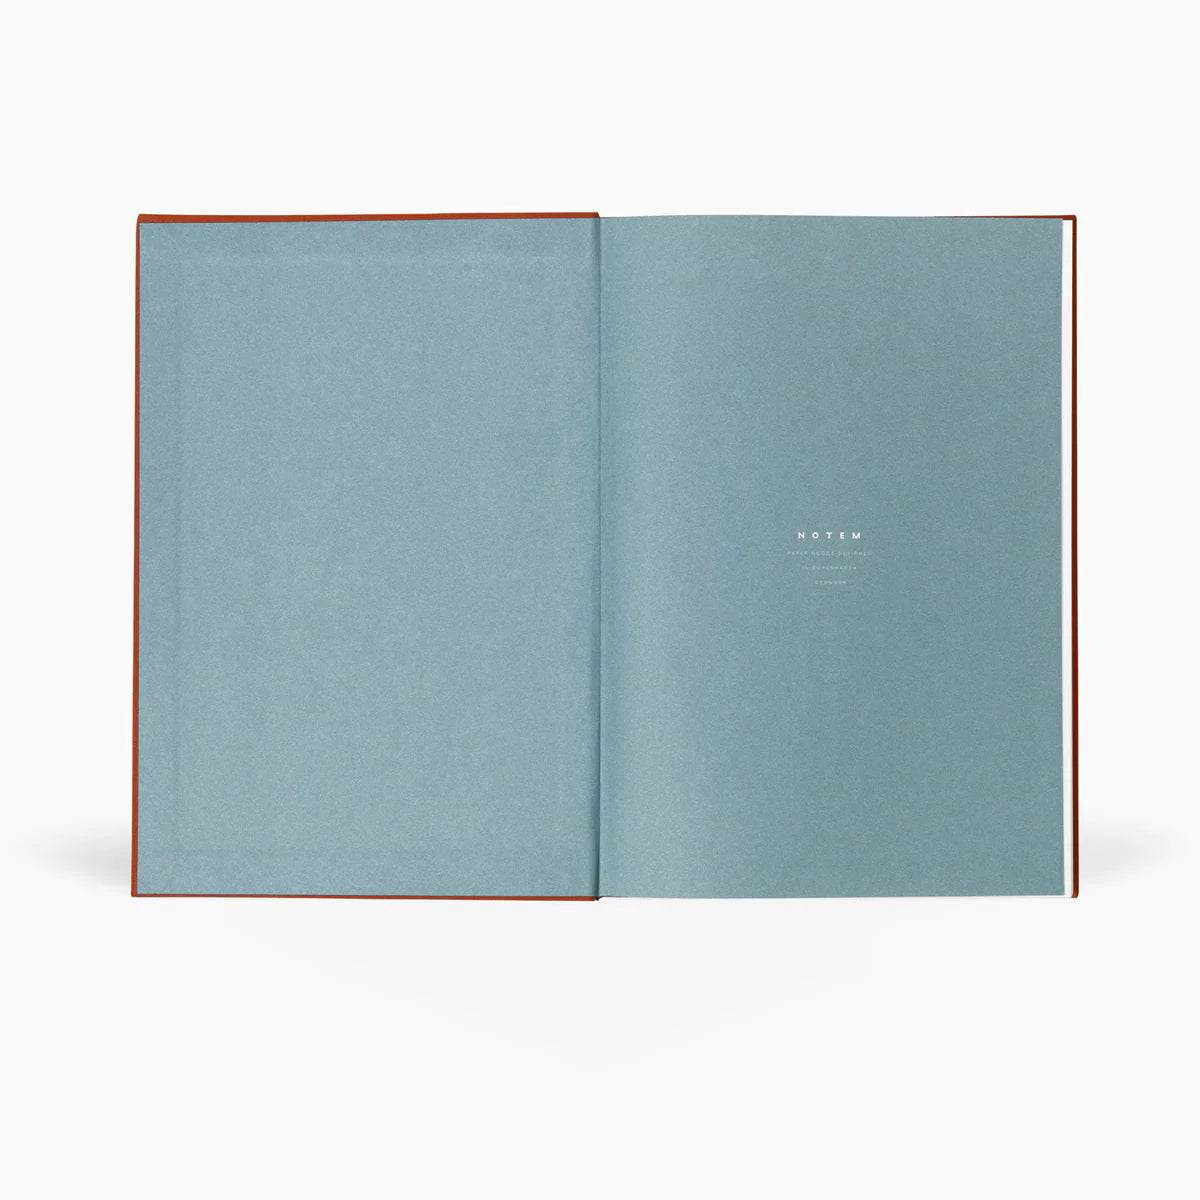 The Every Space lined medium Bea Notebook with Dark Sienna softcover cloth with elastic band by Notem